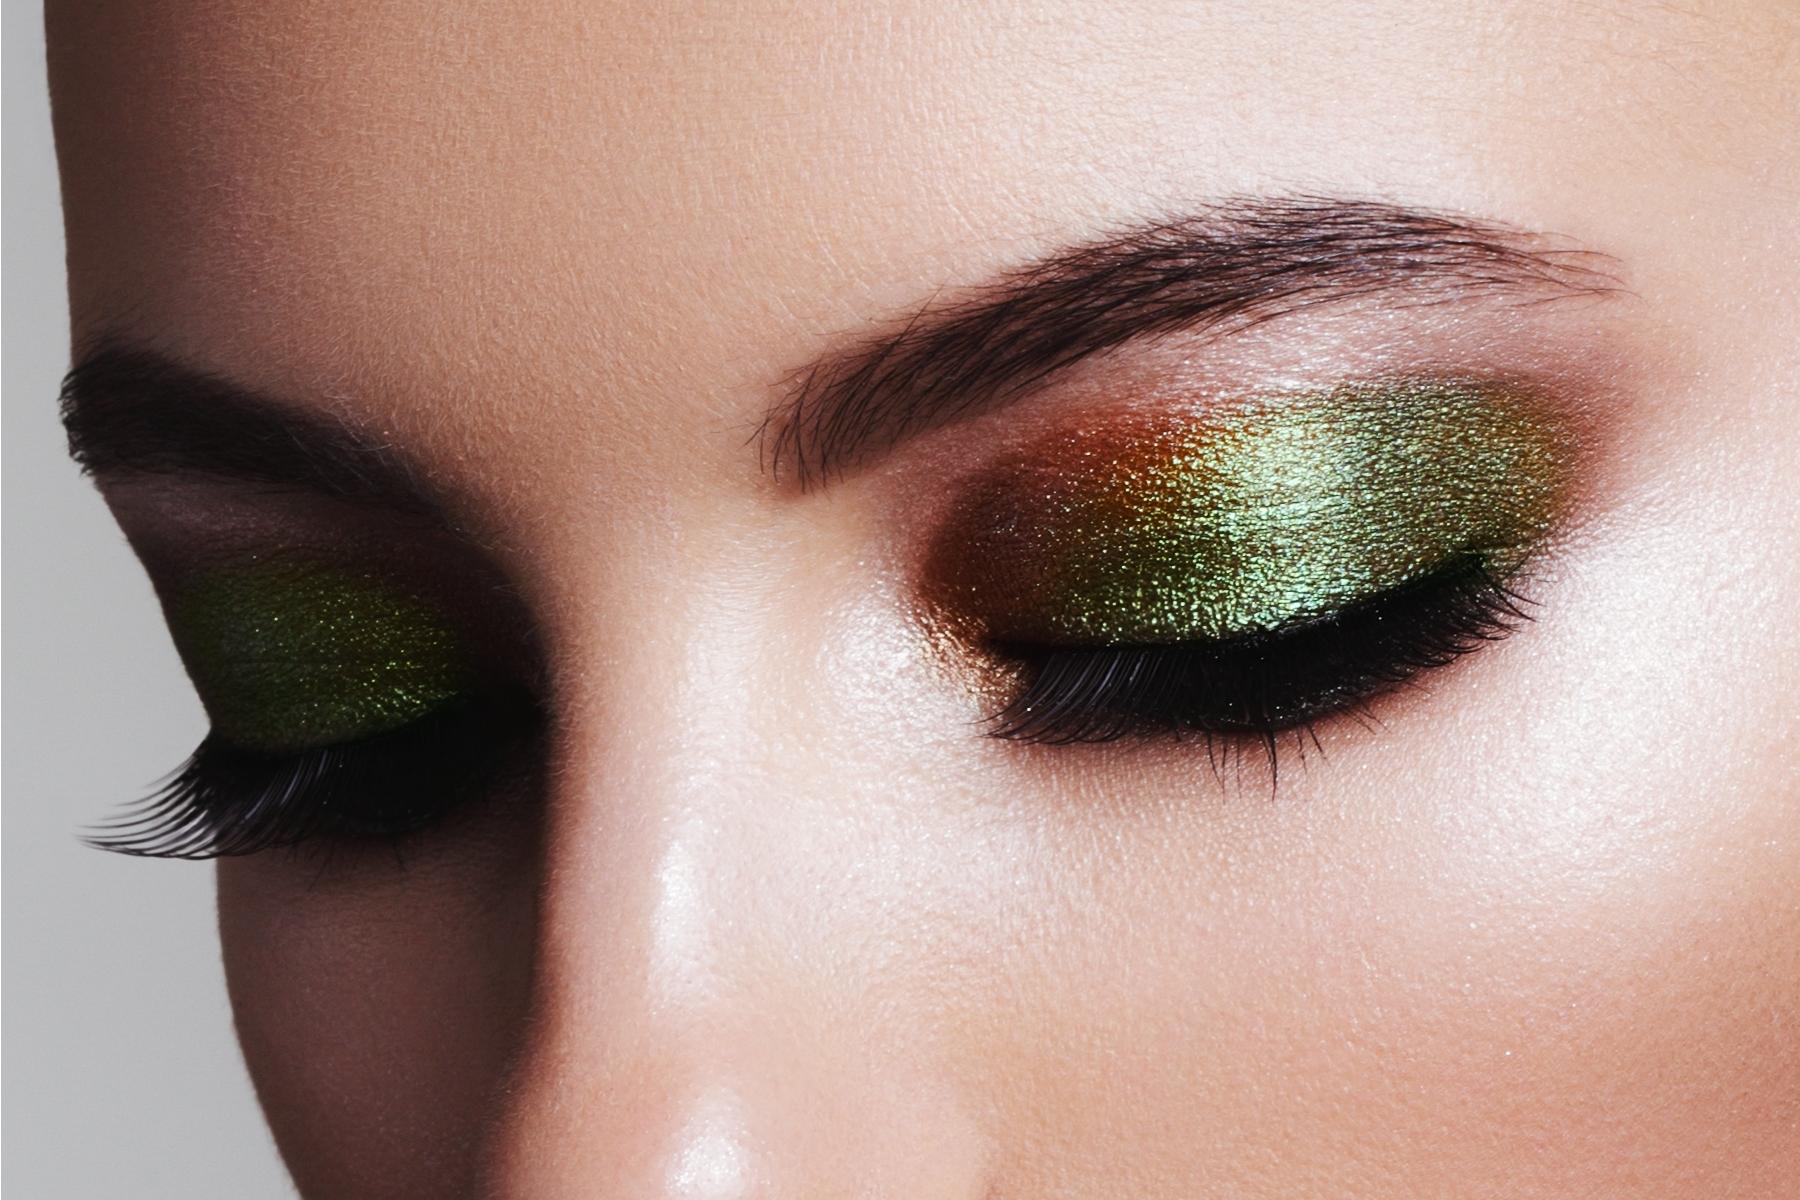 Gorgeous green shades for St. Patrick’s Day